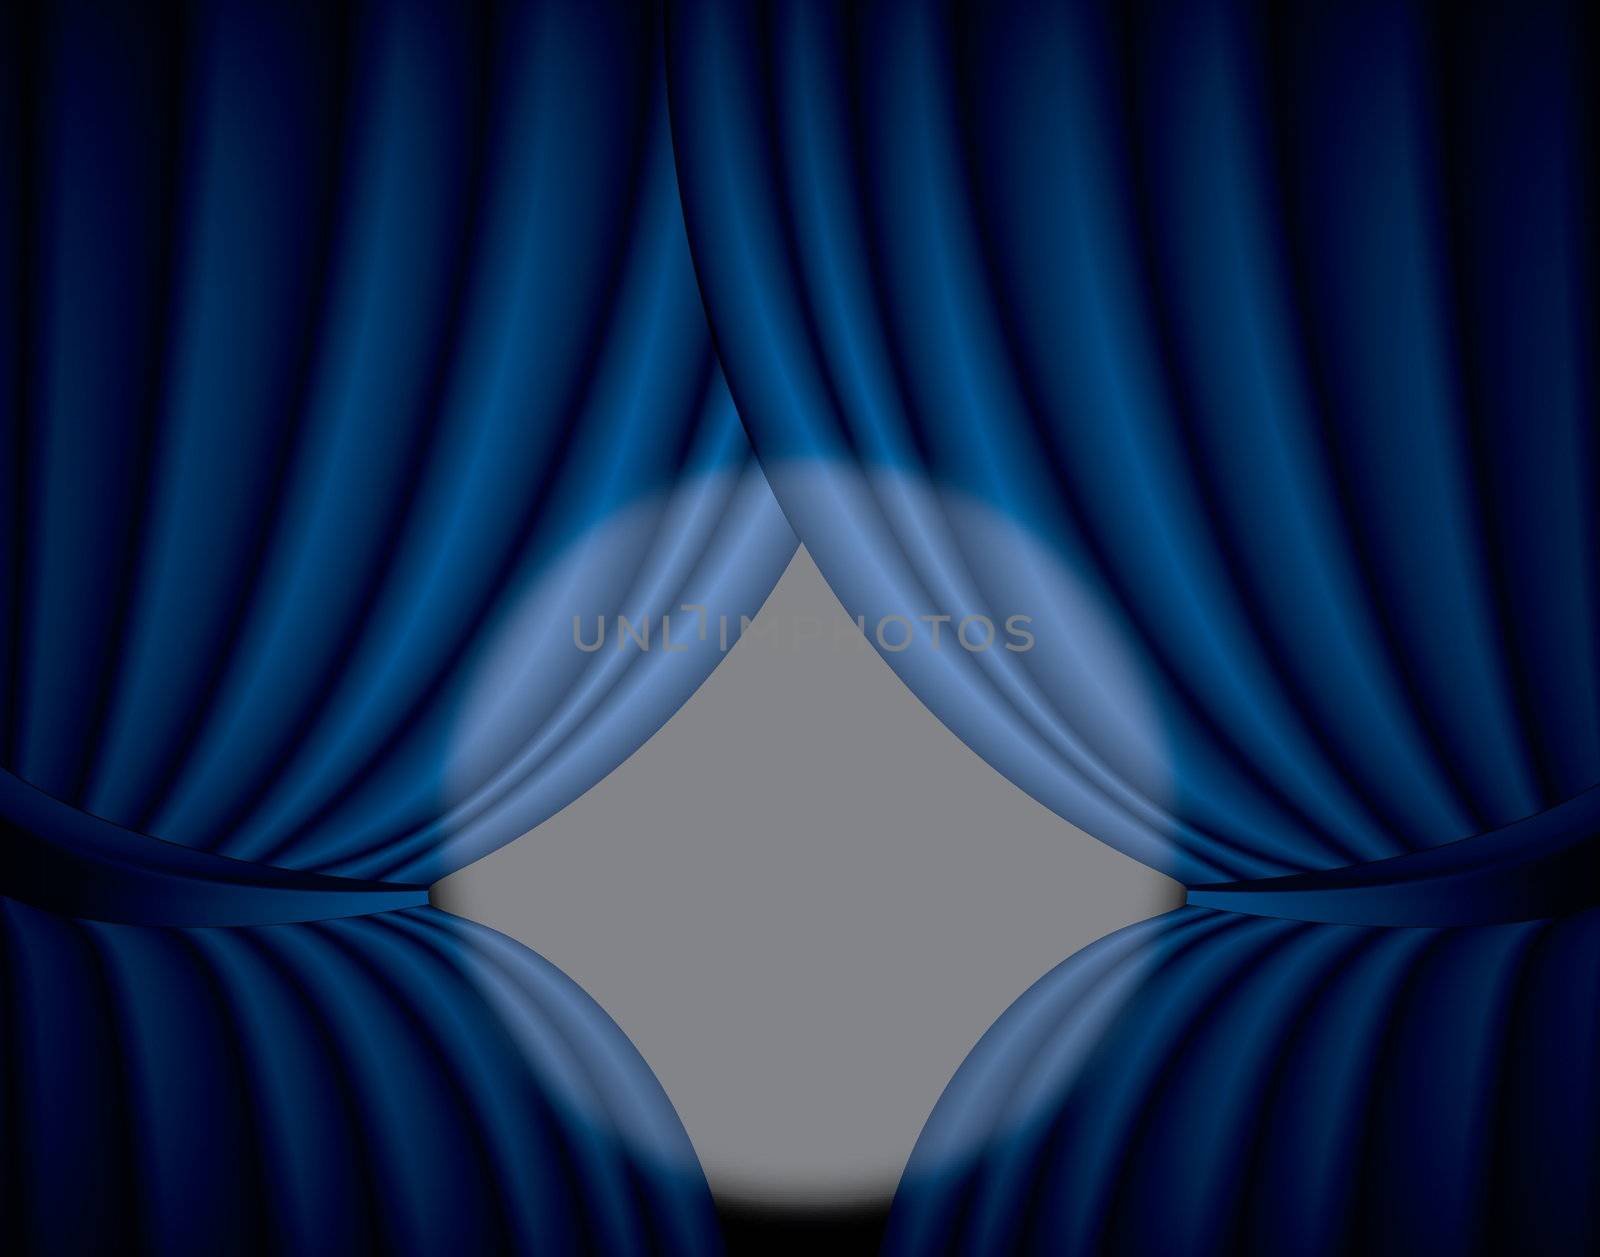 Blue curtain background with spotlight in the center, illustration by svtrotof